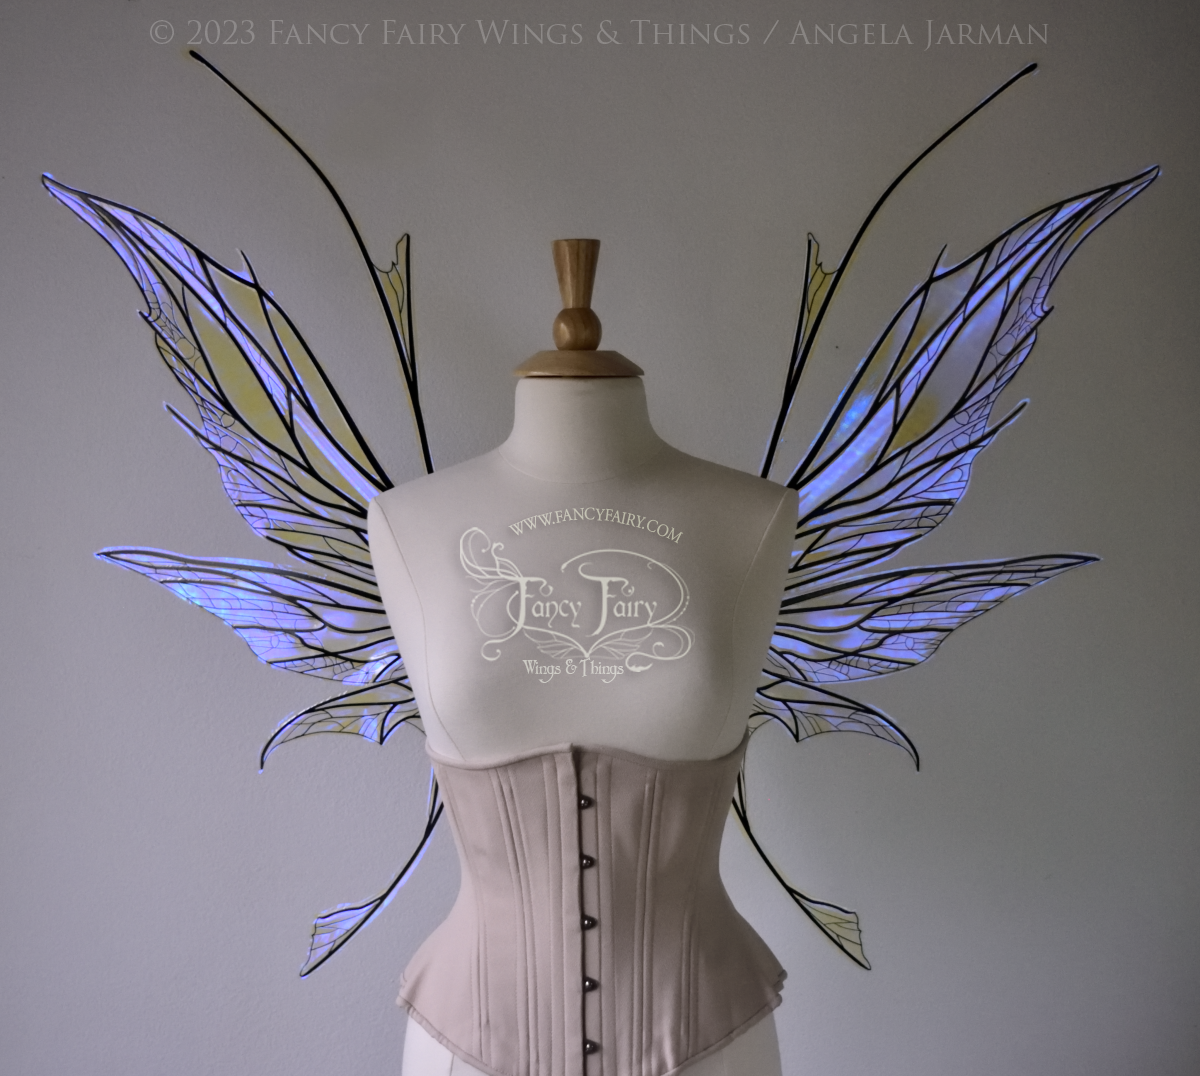 Front view of a dress form wearing an underbust corset & large violet iridescent fairy wings with antennae, black veins, spikey shapes